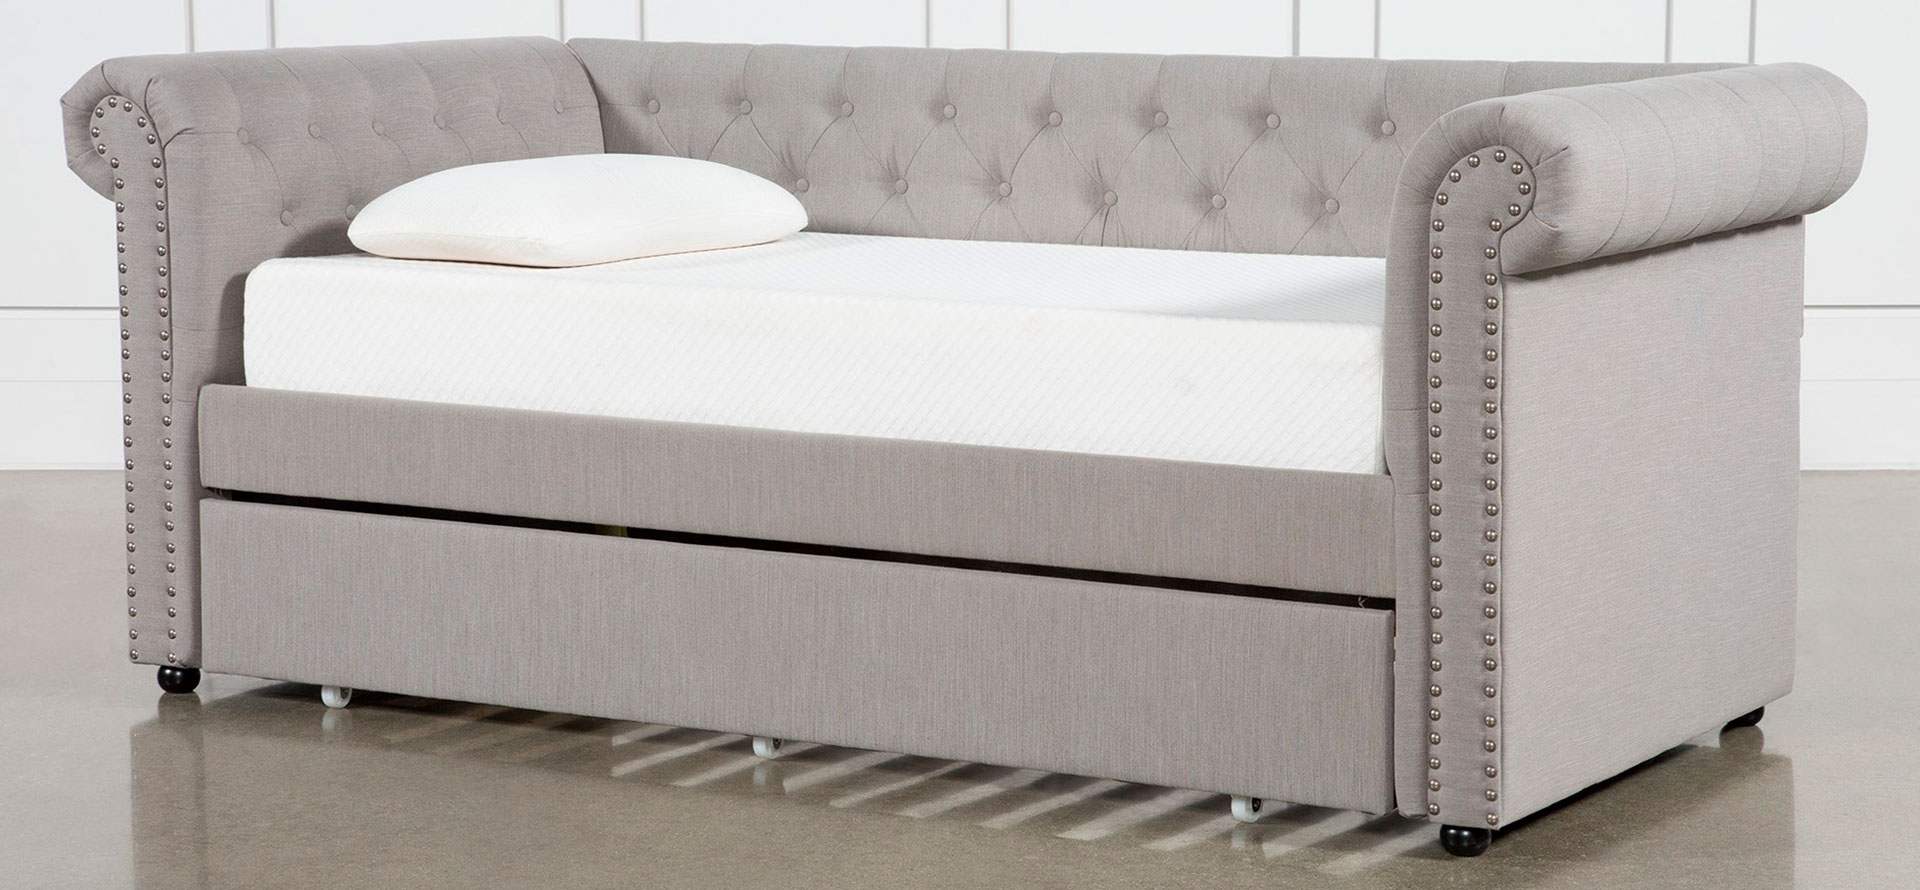 Mattress for daybed.